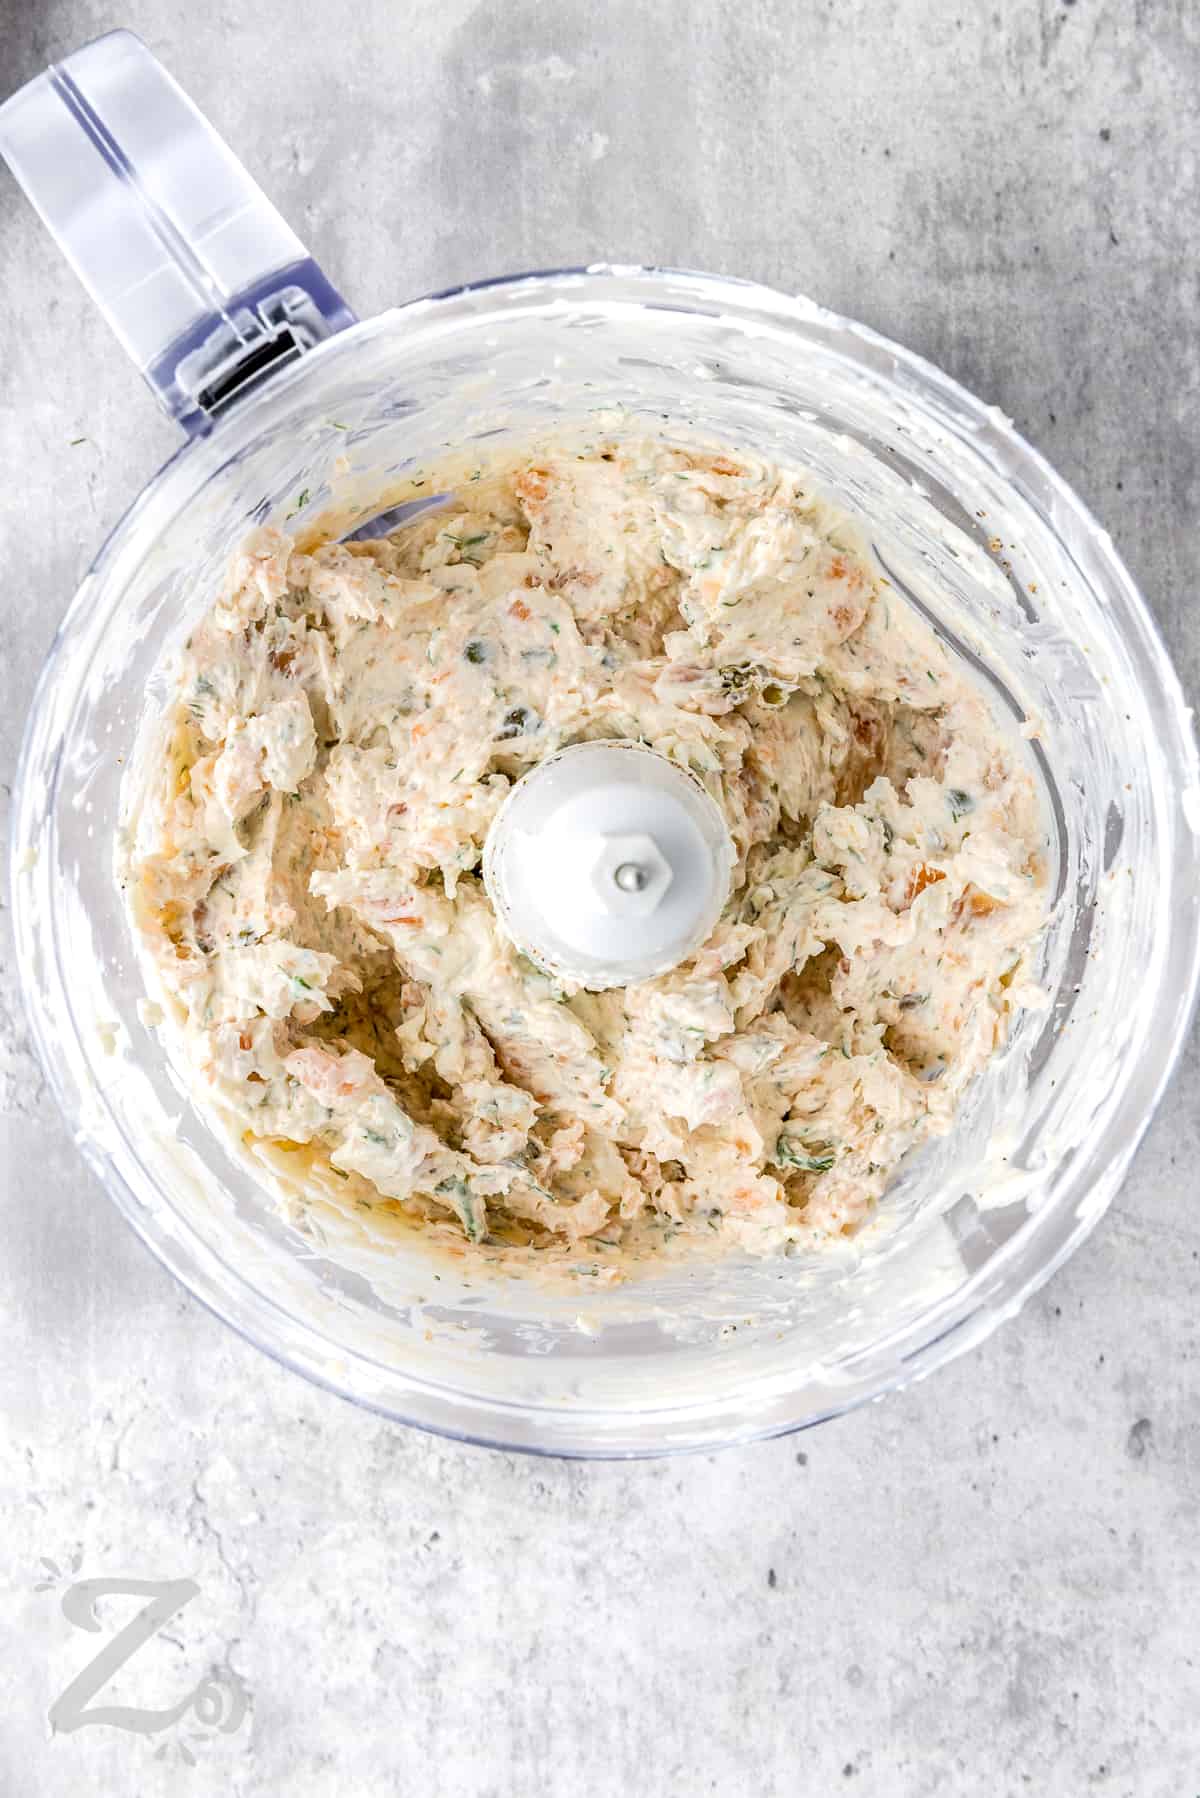 blended Smoked Salmon Dip in the food processor